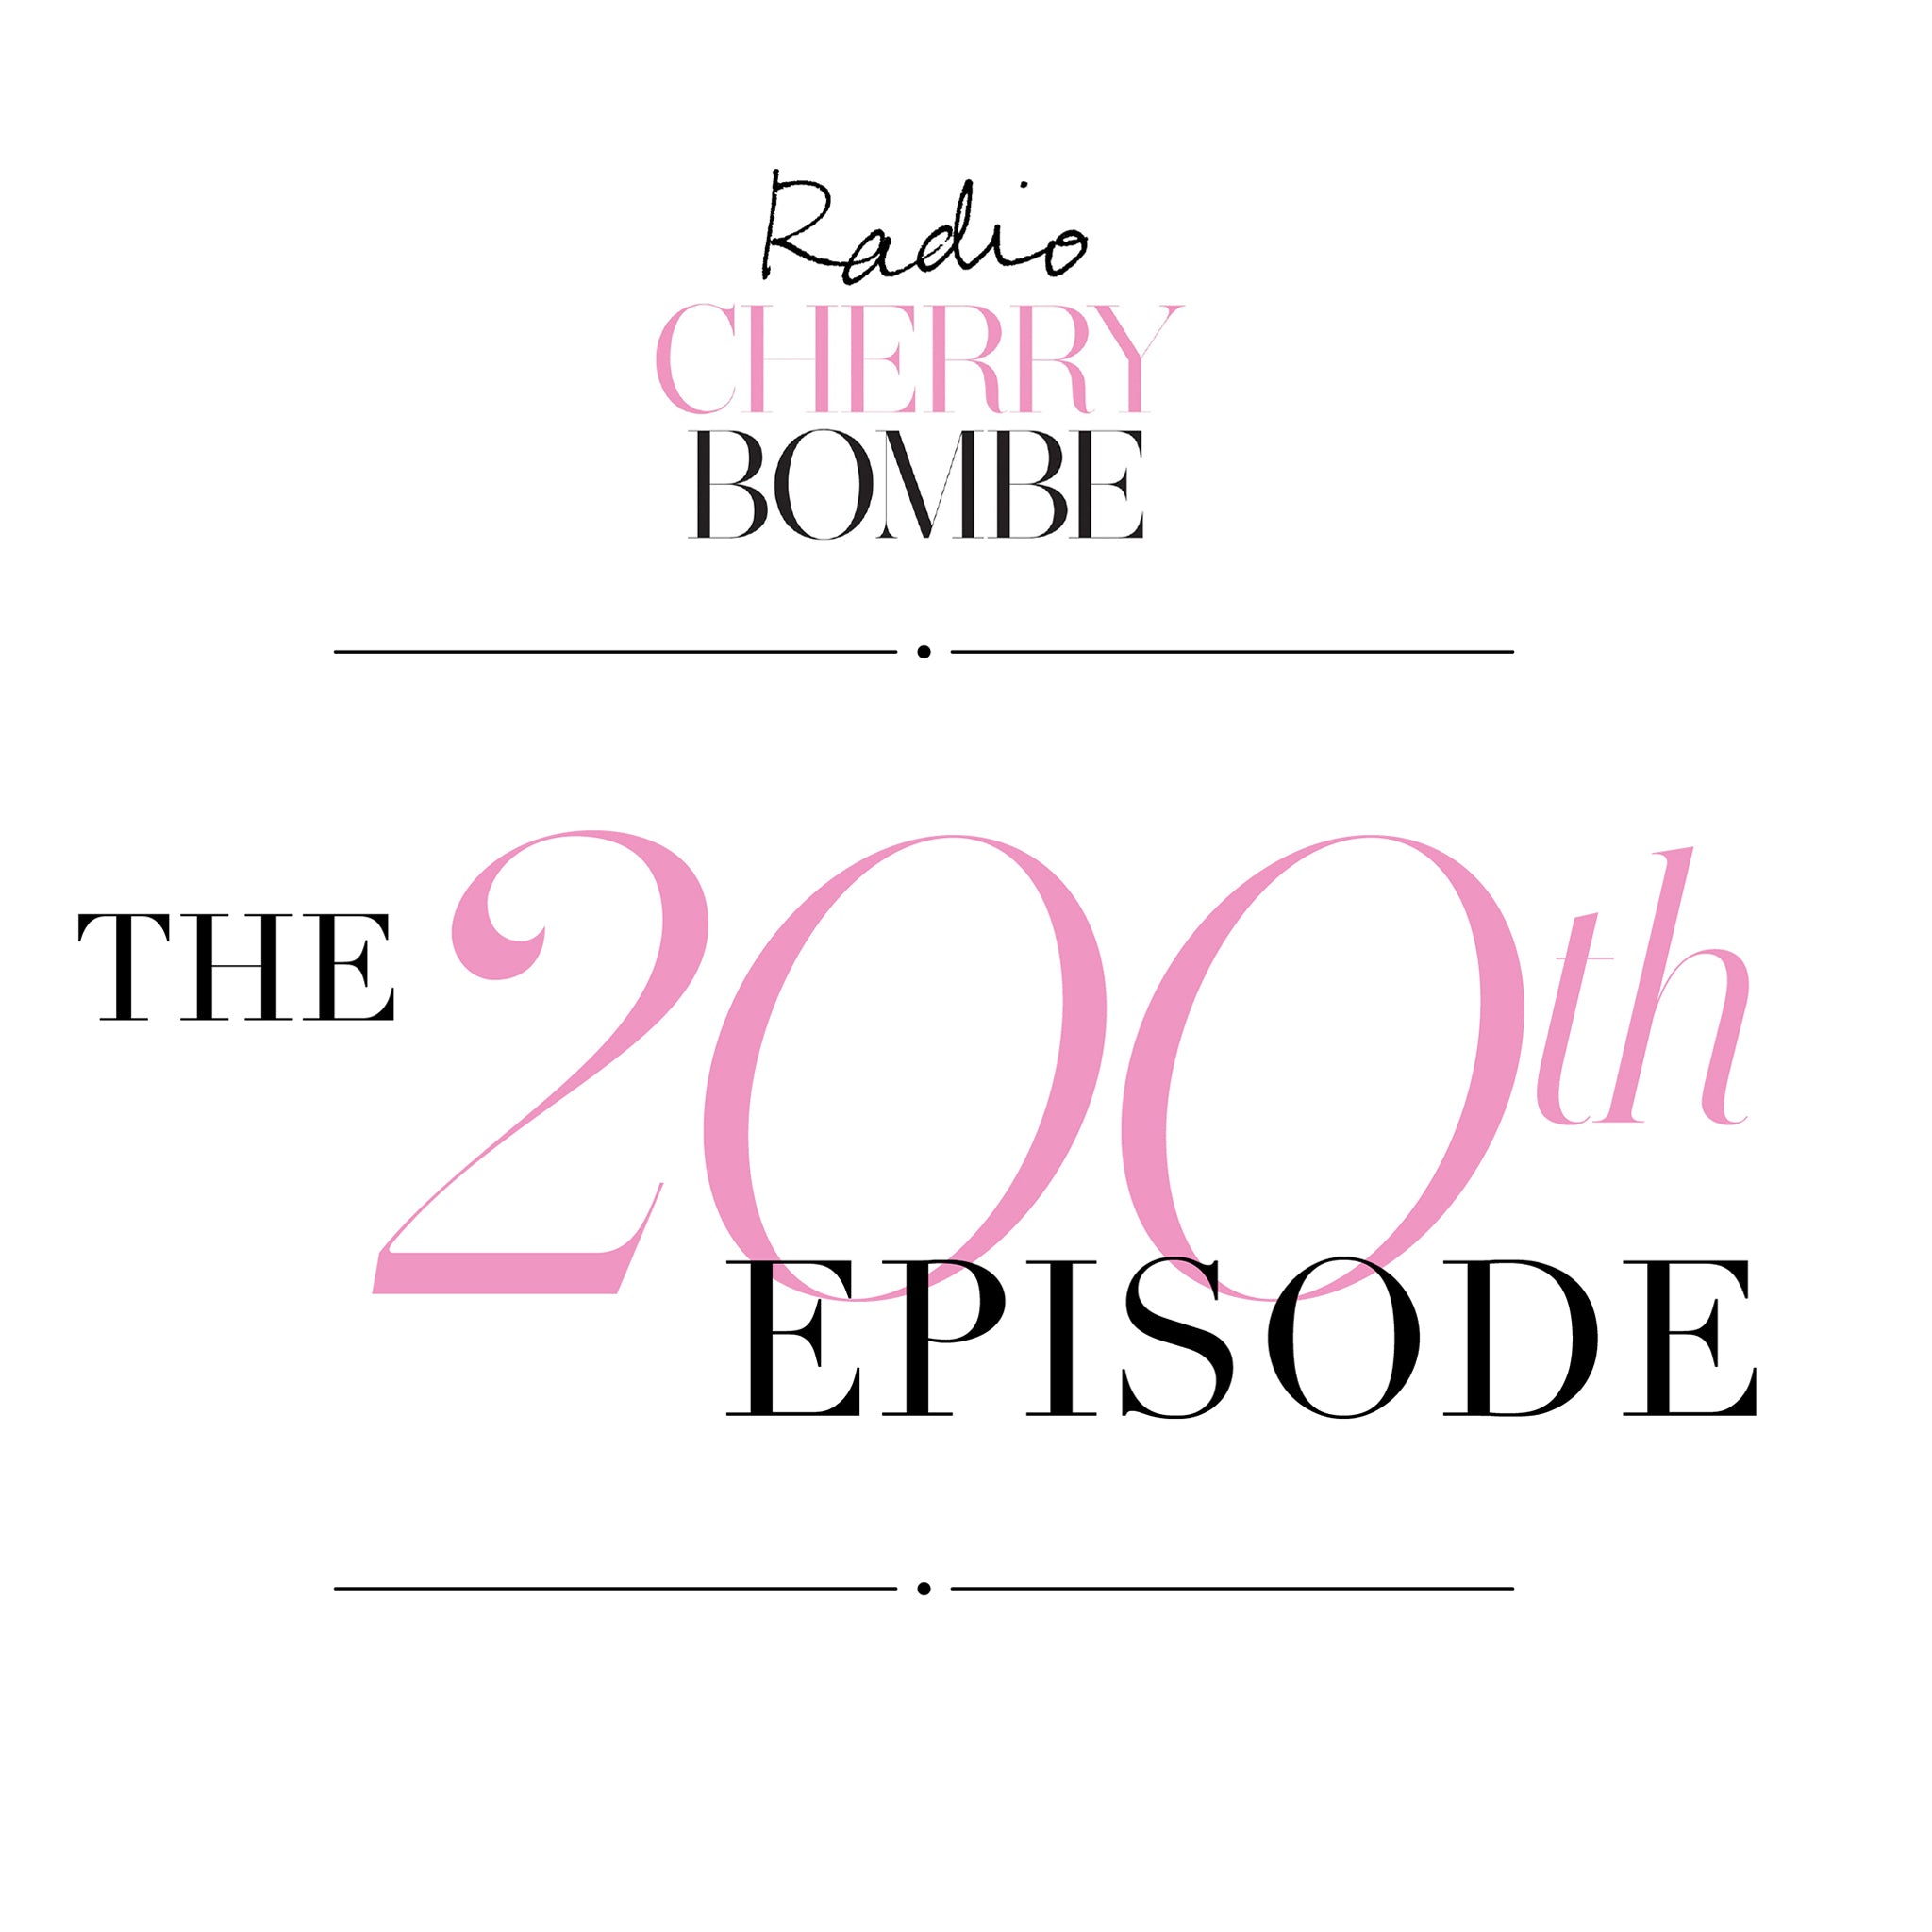 It's Our 200th Episode!